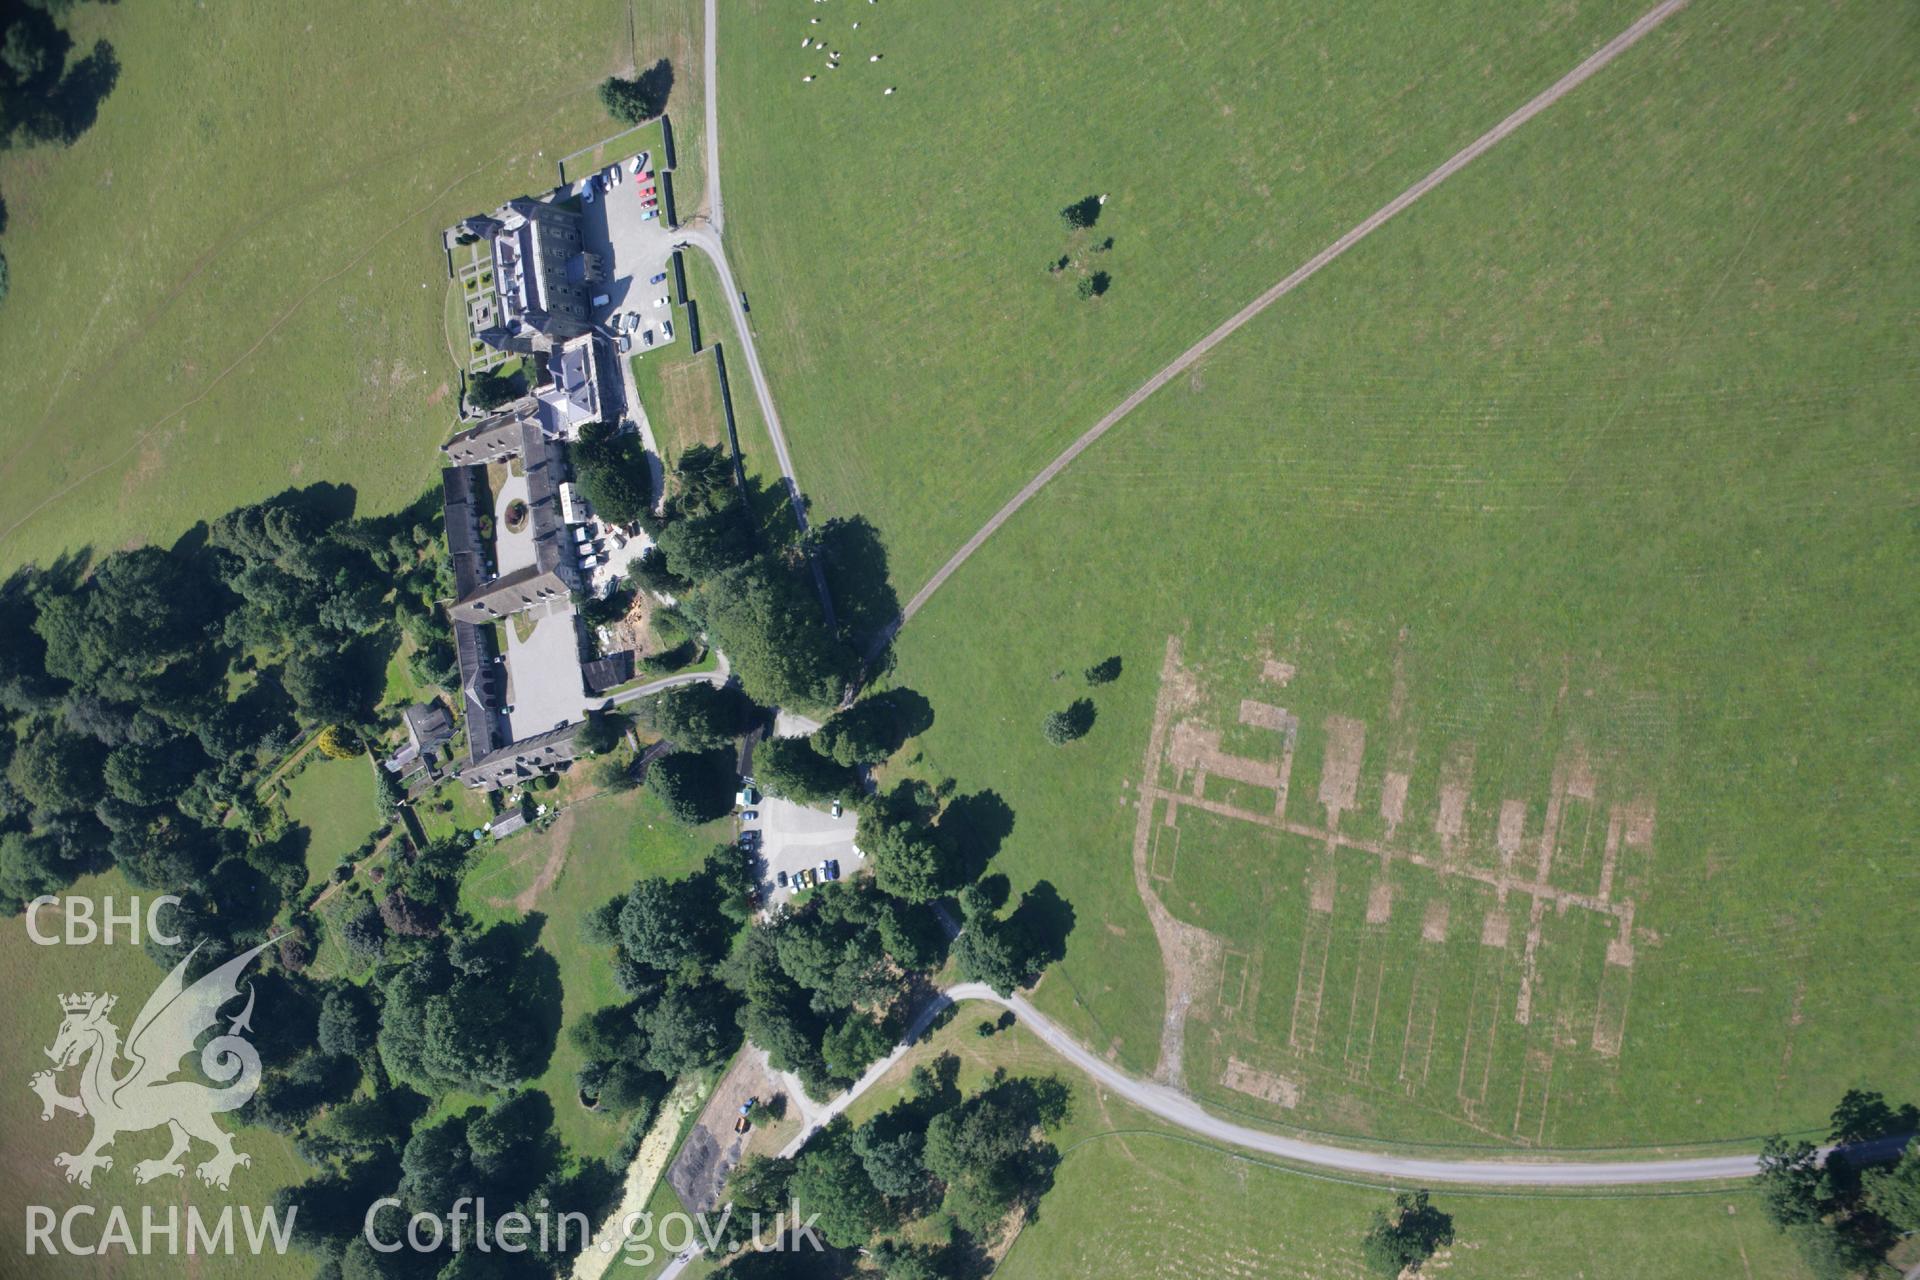 RCAHMW colour oblique aerial photograph of Dinefwr Castle (Newton House). Taken on 24 July 2006 by Toby Driver